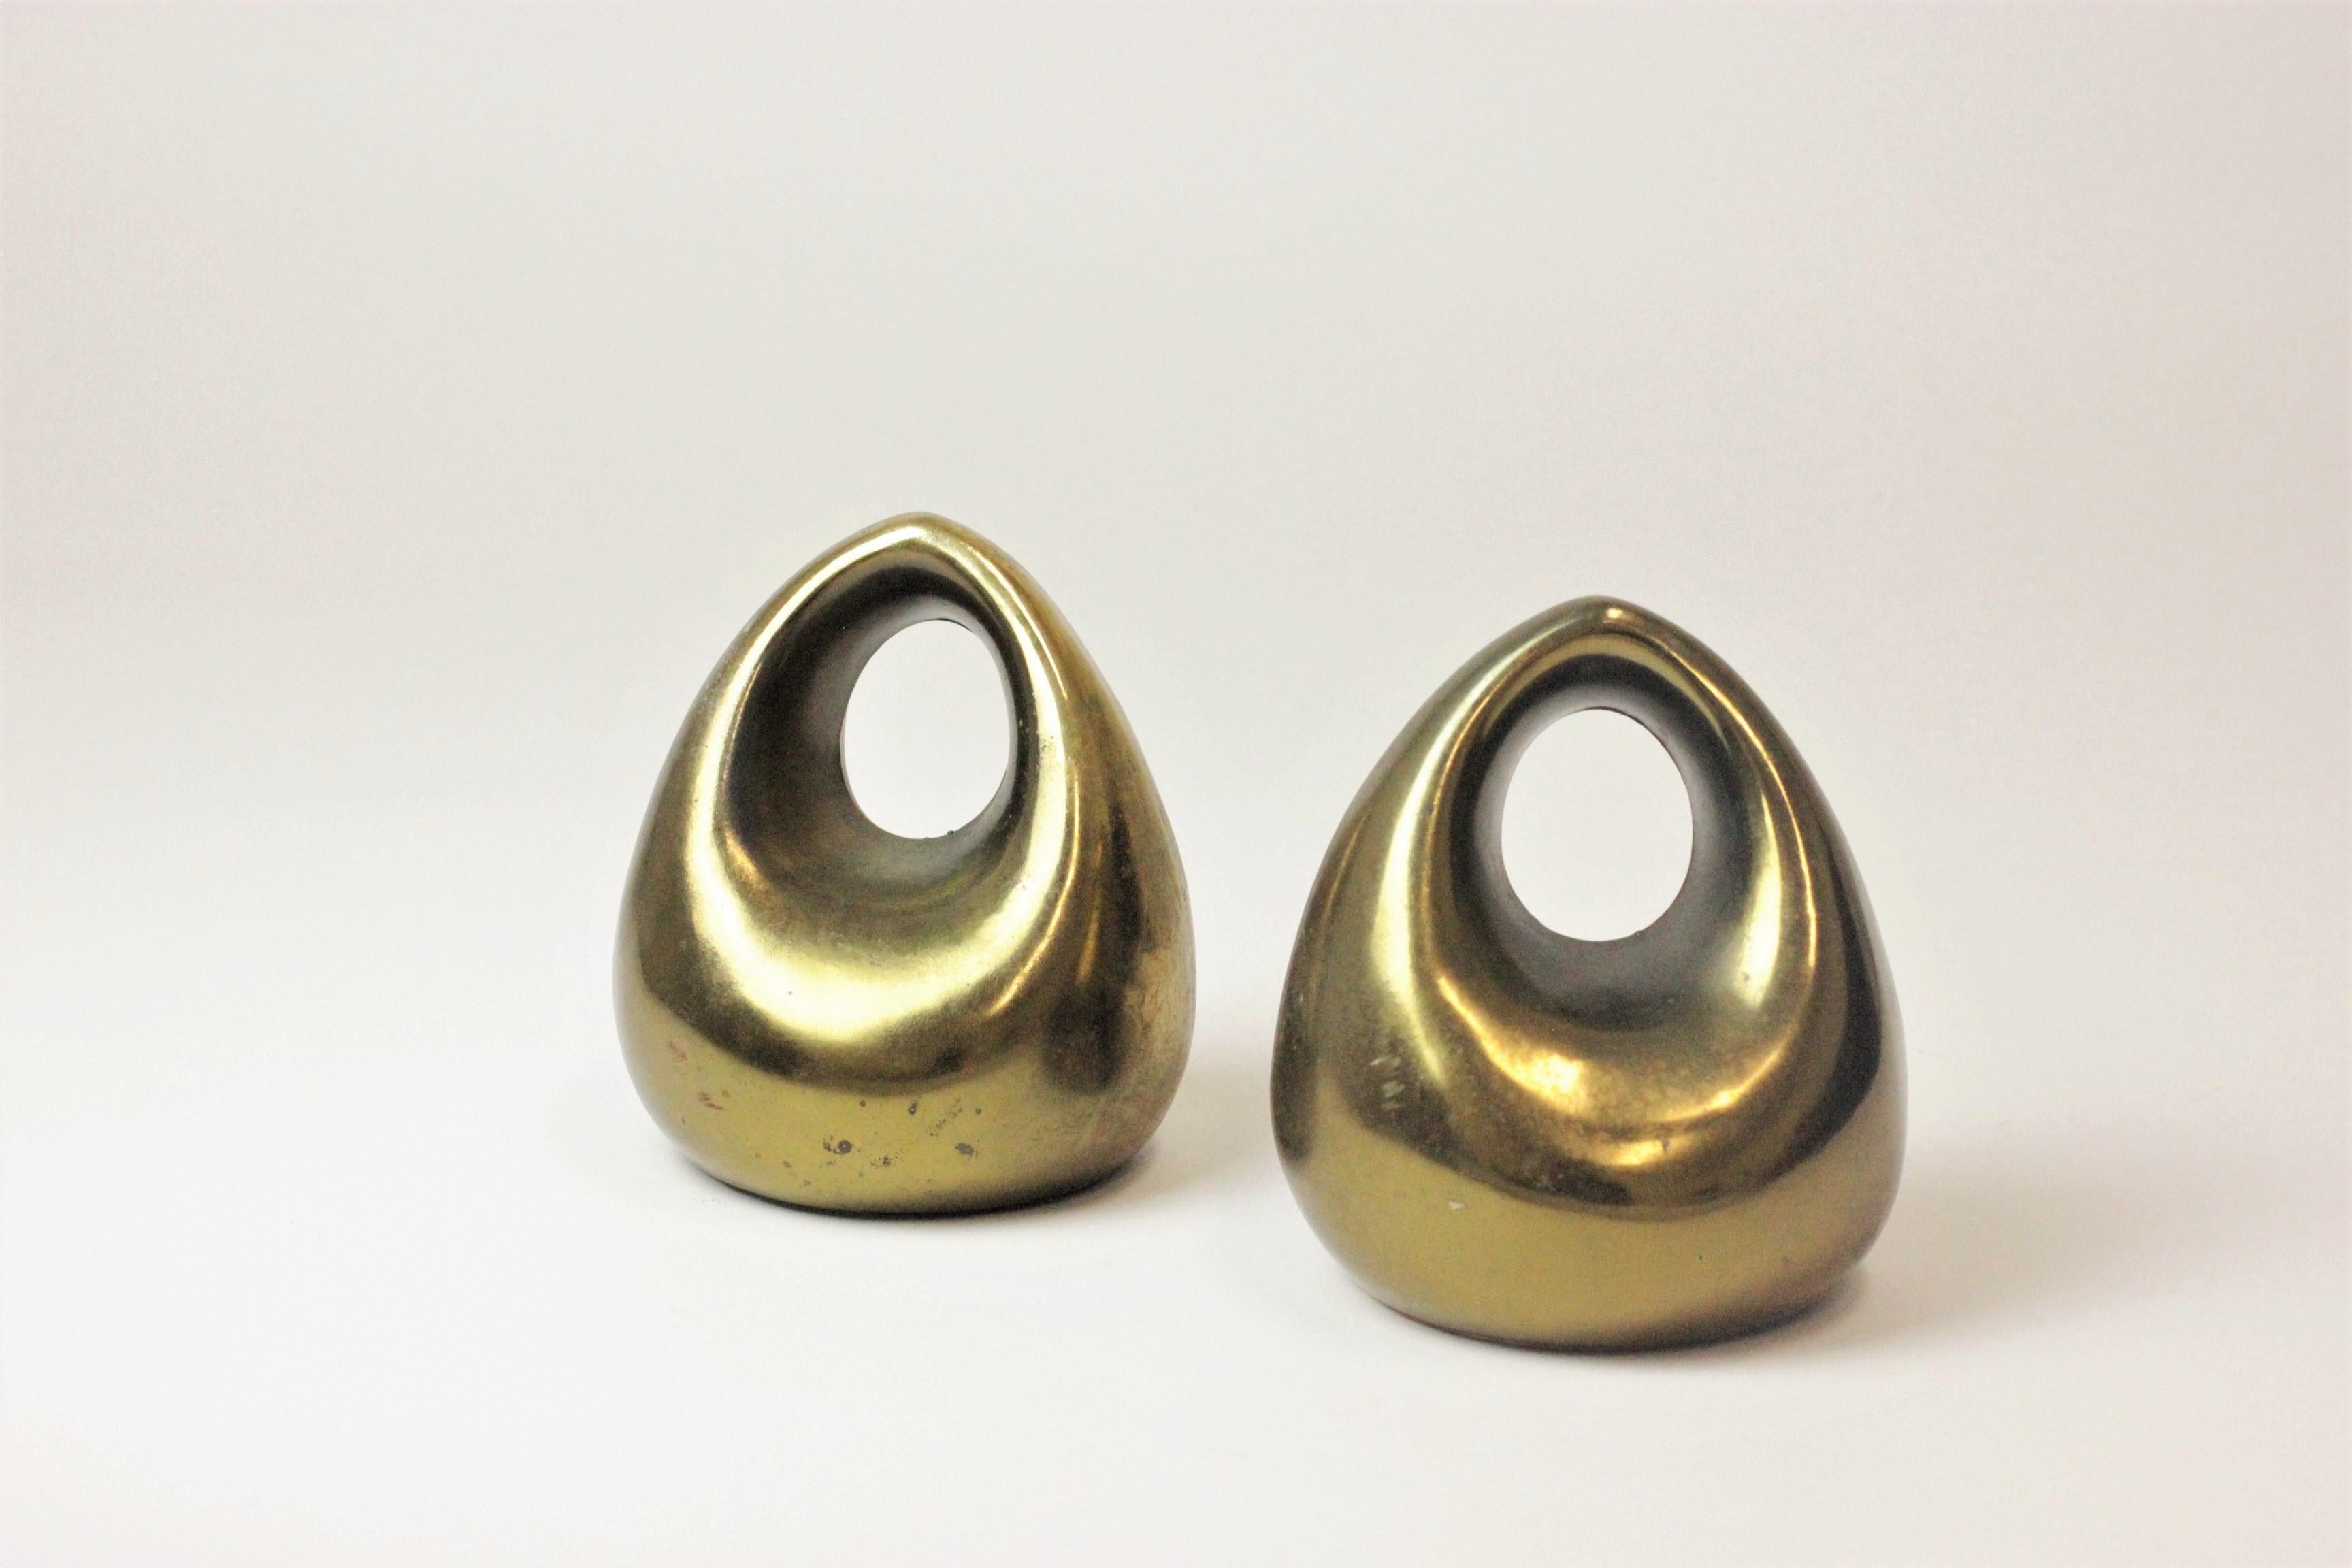 Mid-Century Modern Ben Seibel Orb bookend pair; originally produced in North America during the 20th century. 

